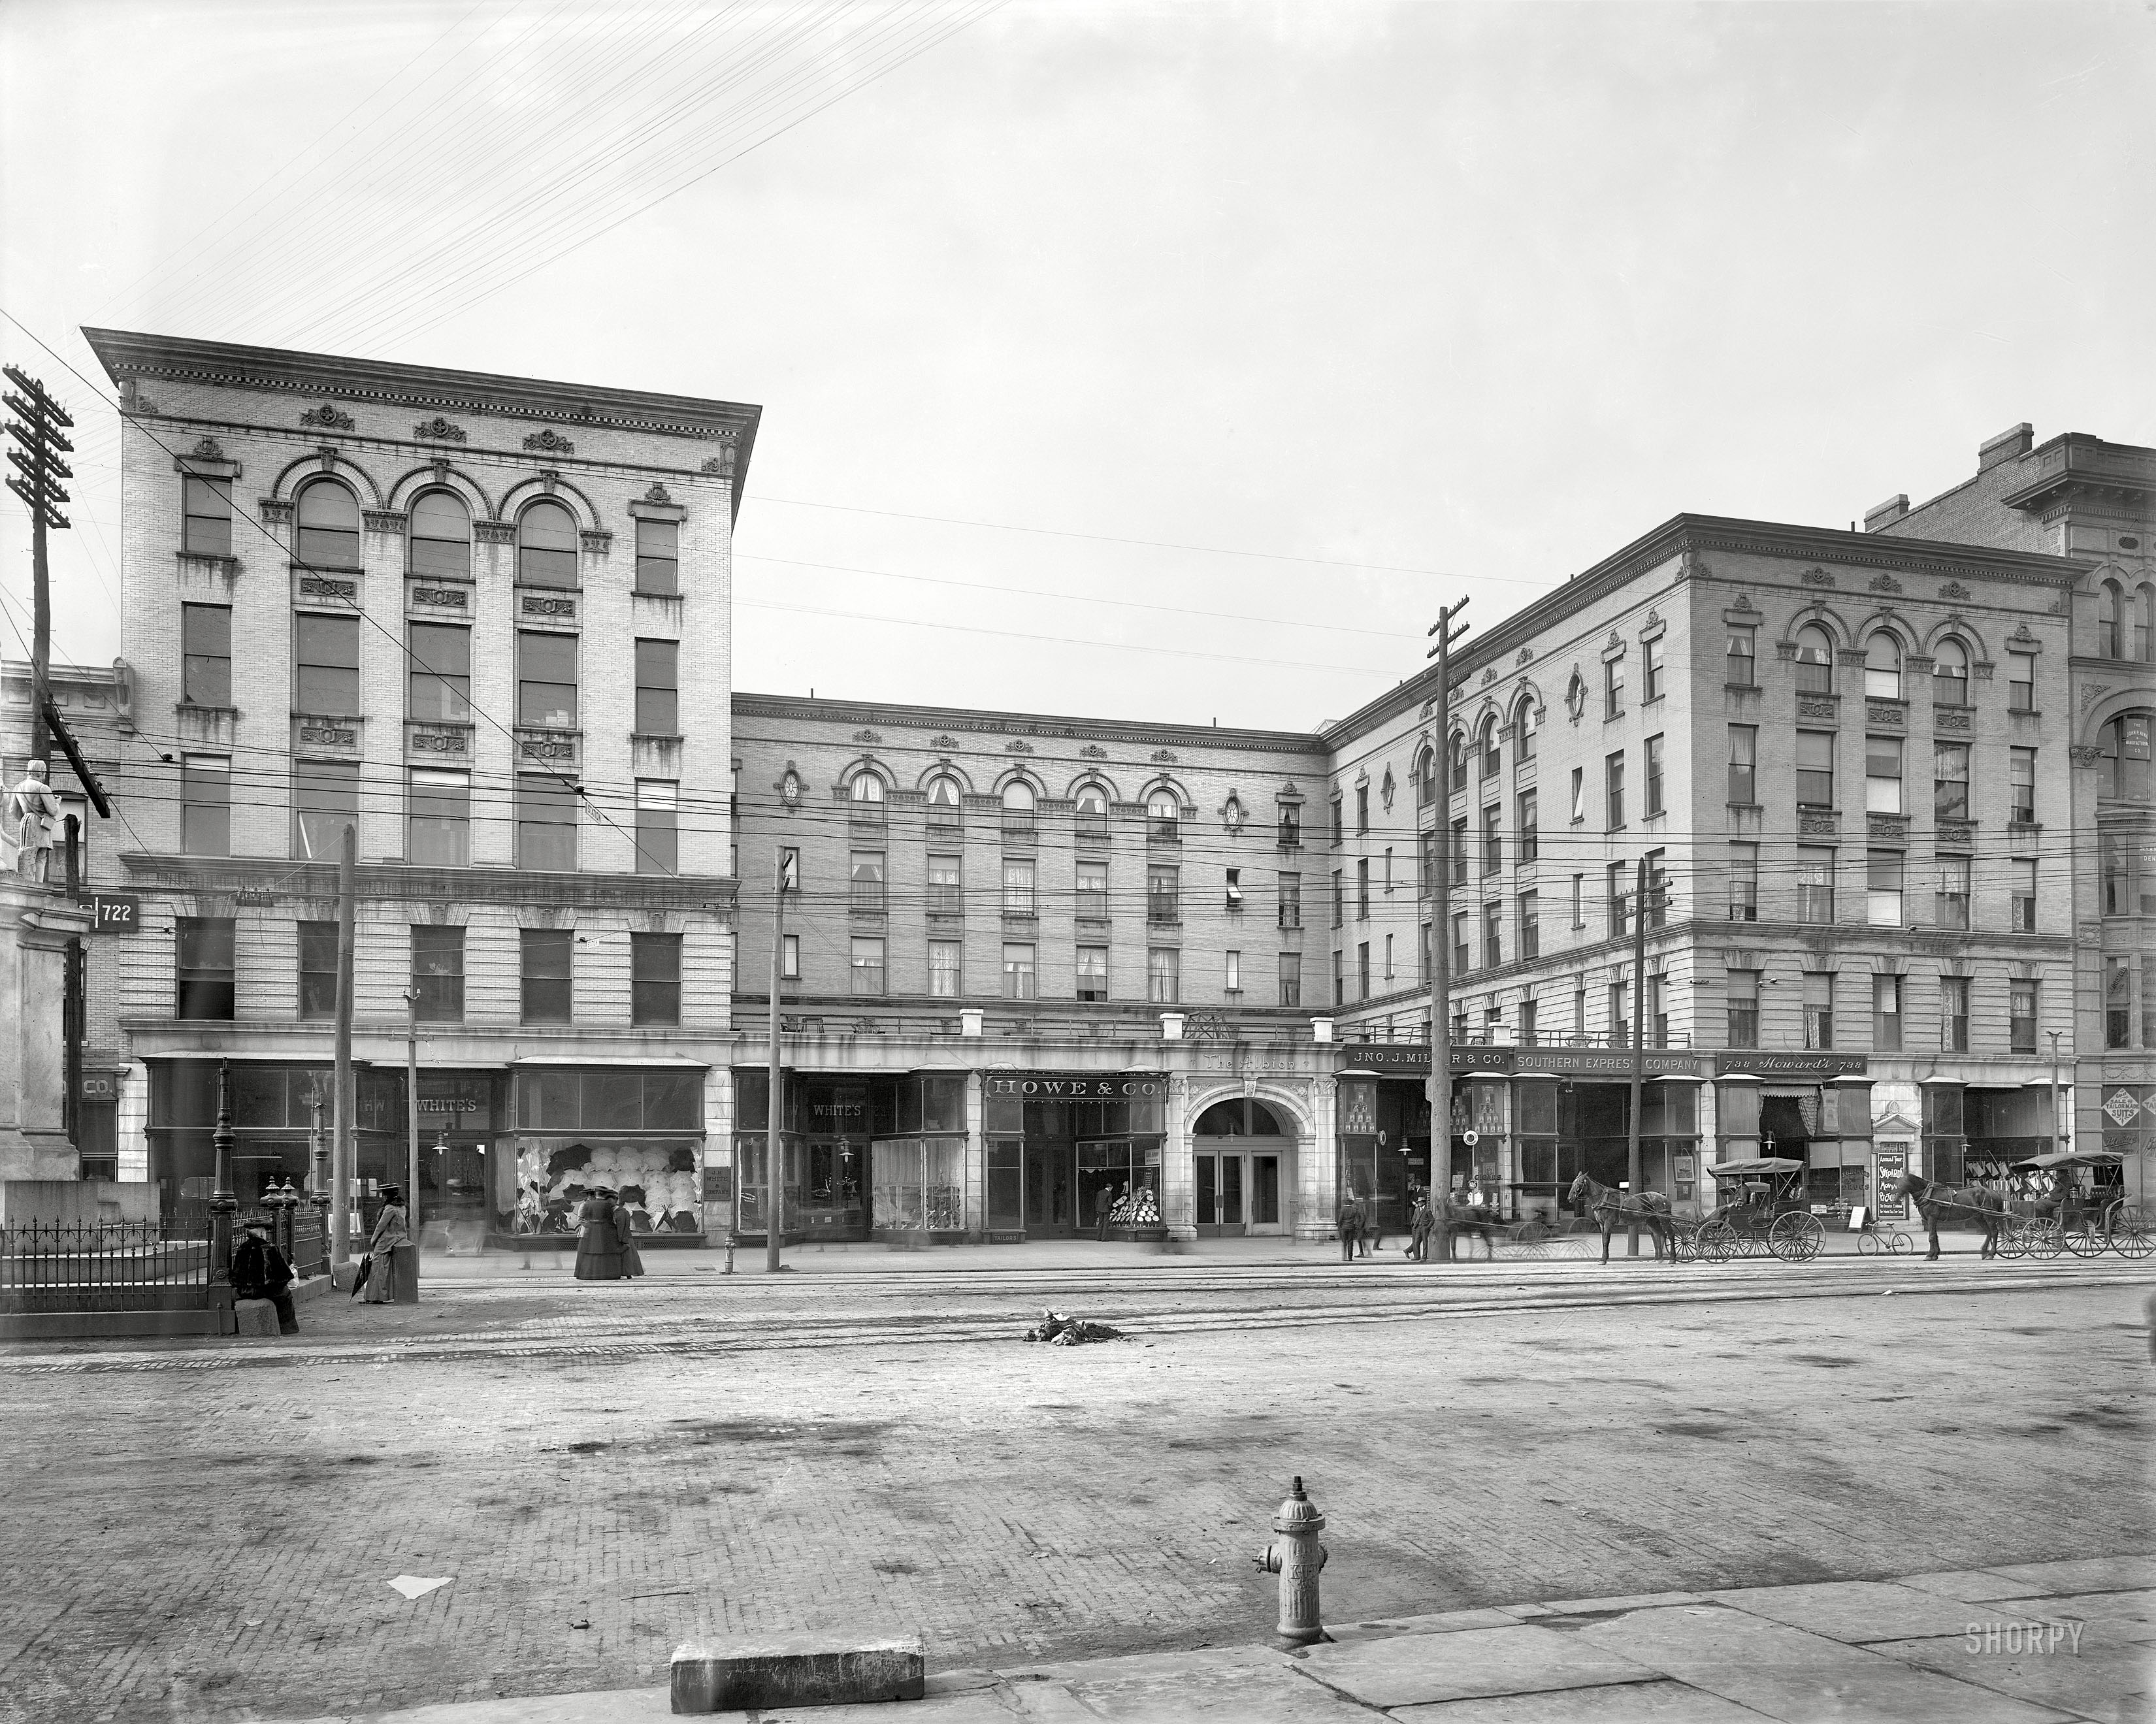 Augusta, Georgia, circa 1905. "The Albion." Please watch your step crossing the street. 8x10 inch glass negative, Detroit Publishing Company. View full size.